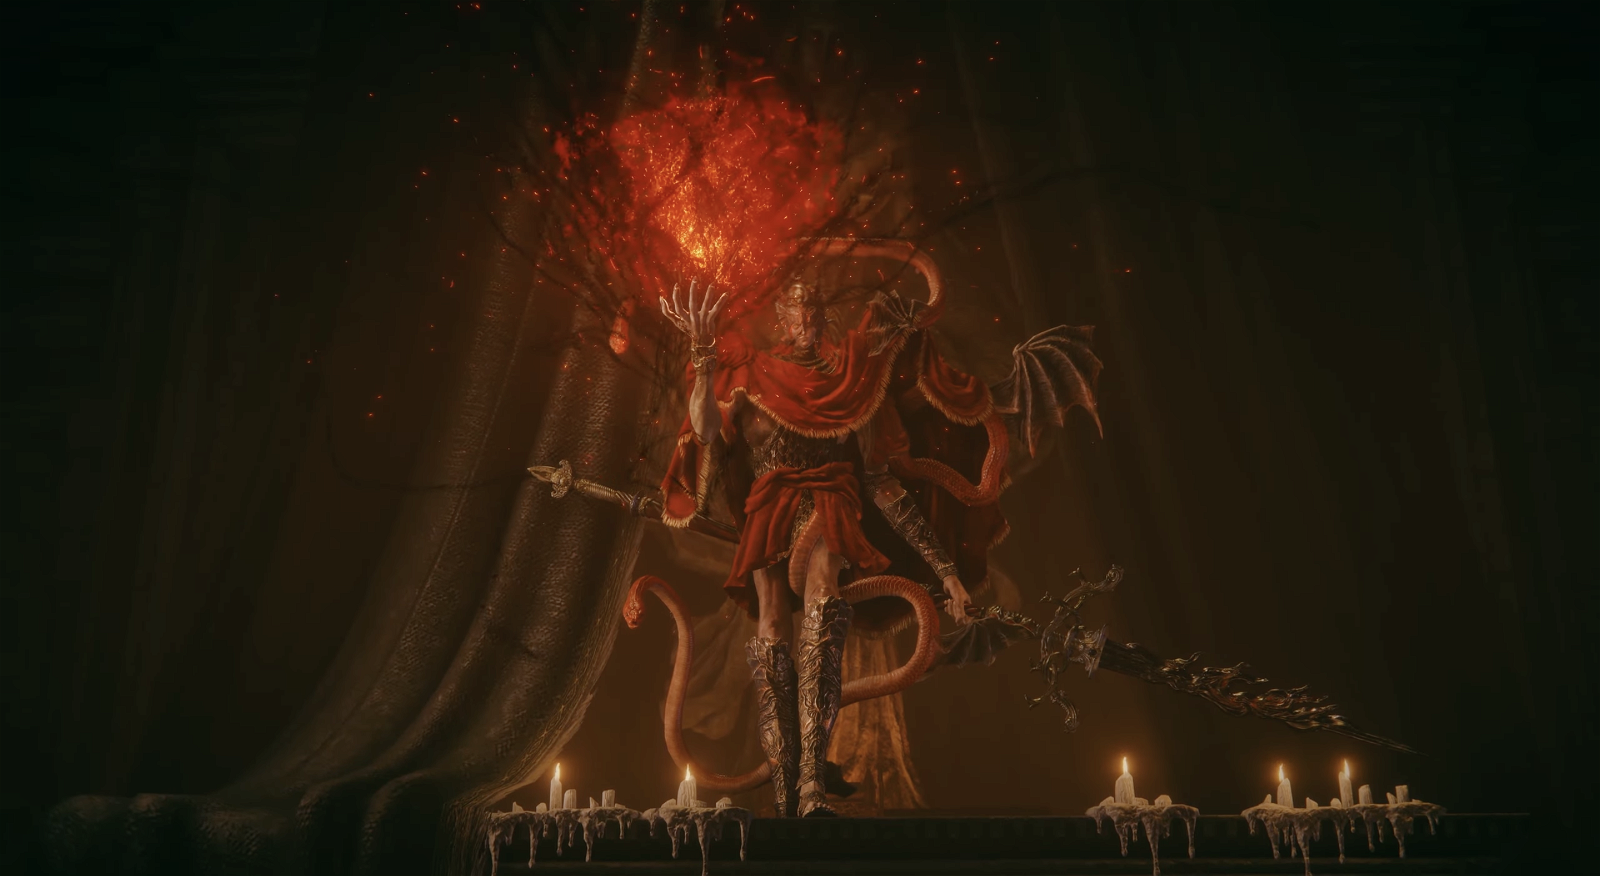 A lot of new enemies and elements will be introduced in the upcoming Shadow of the Erdtree DLC | A still from the Gameplay Trailer